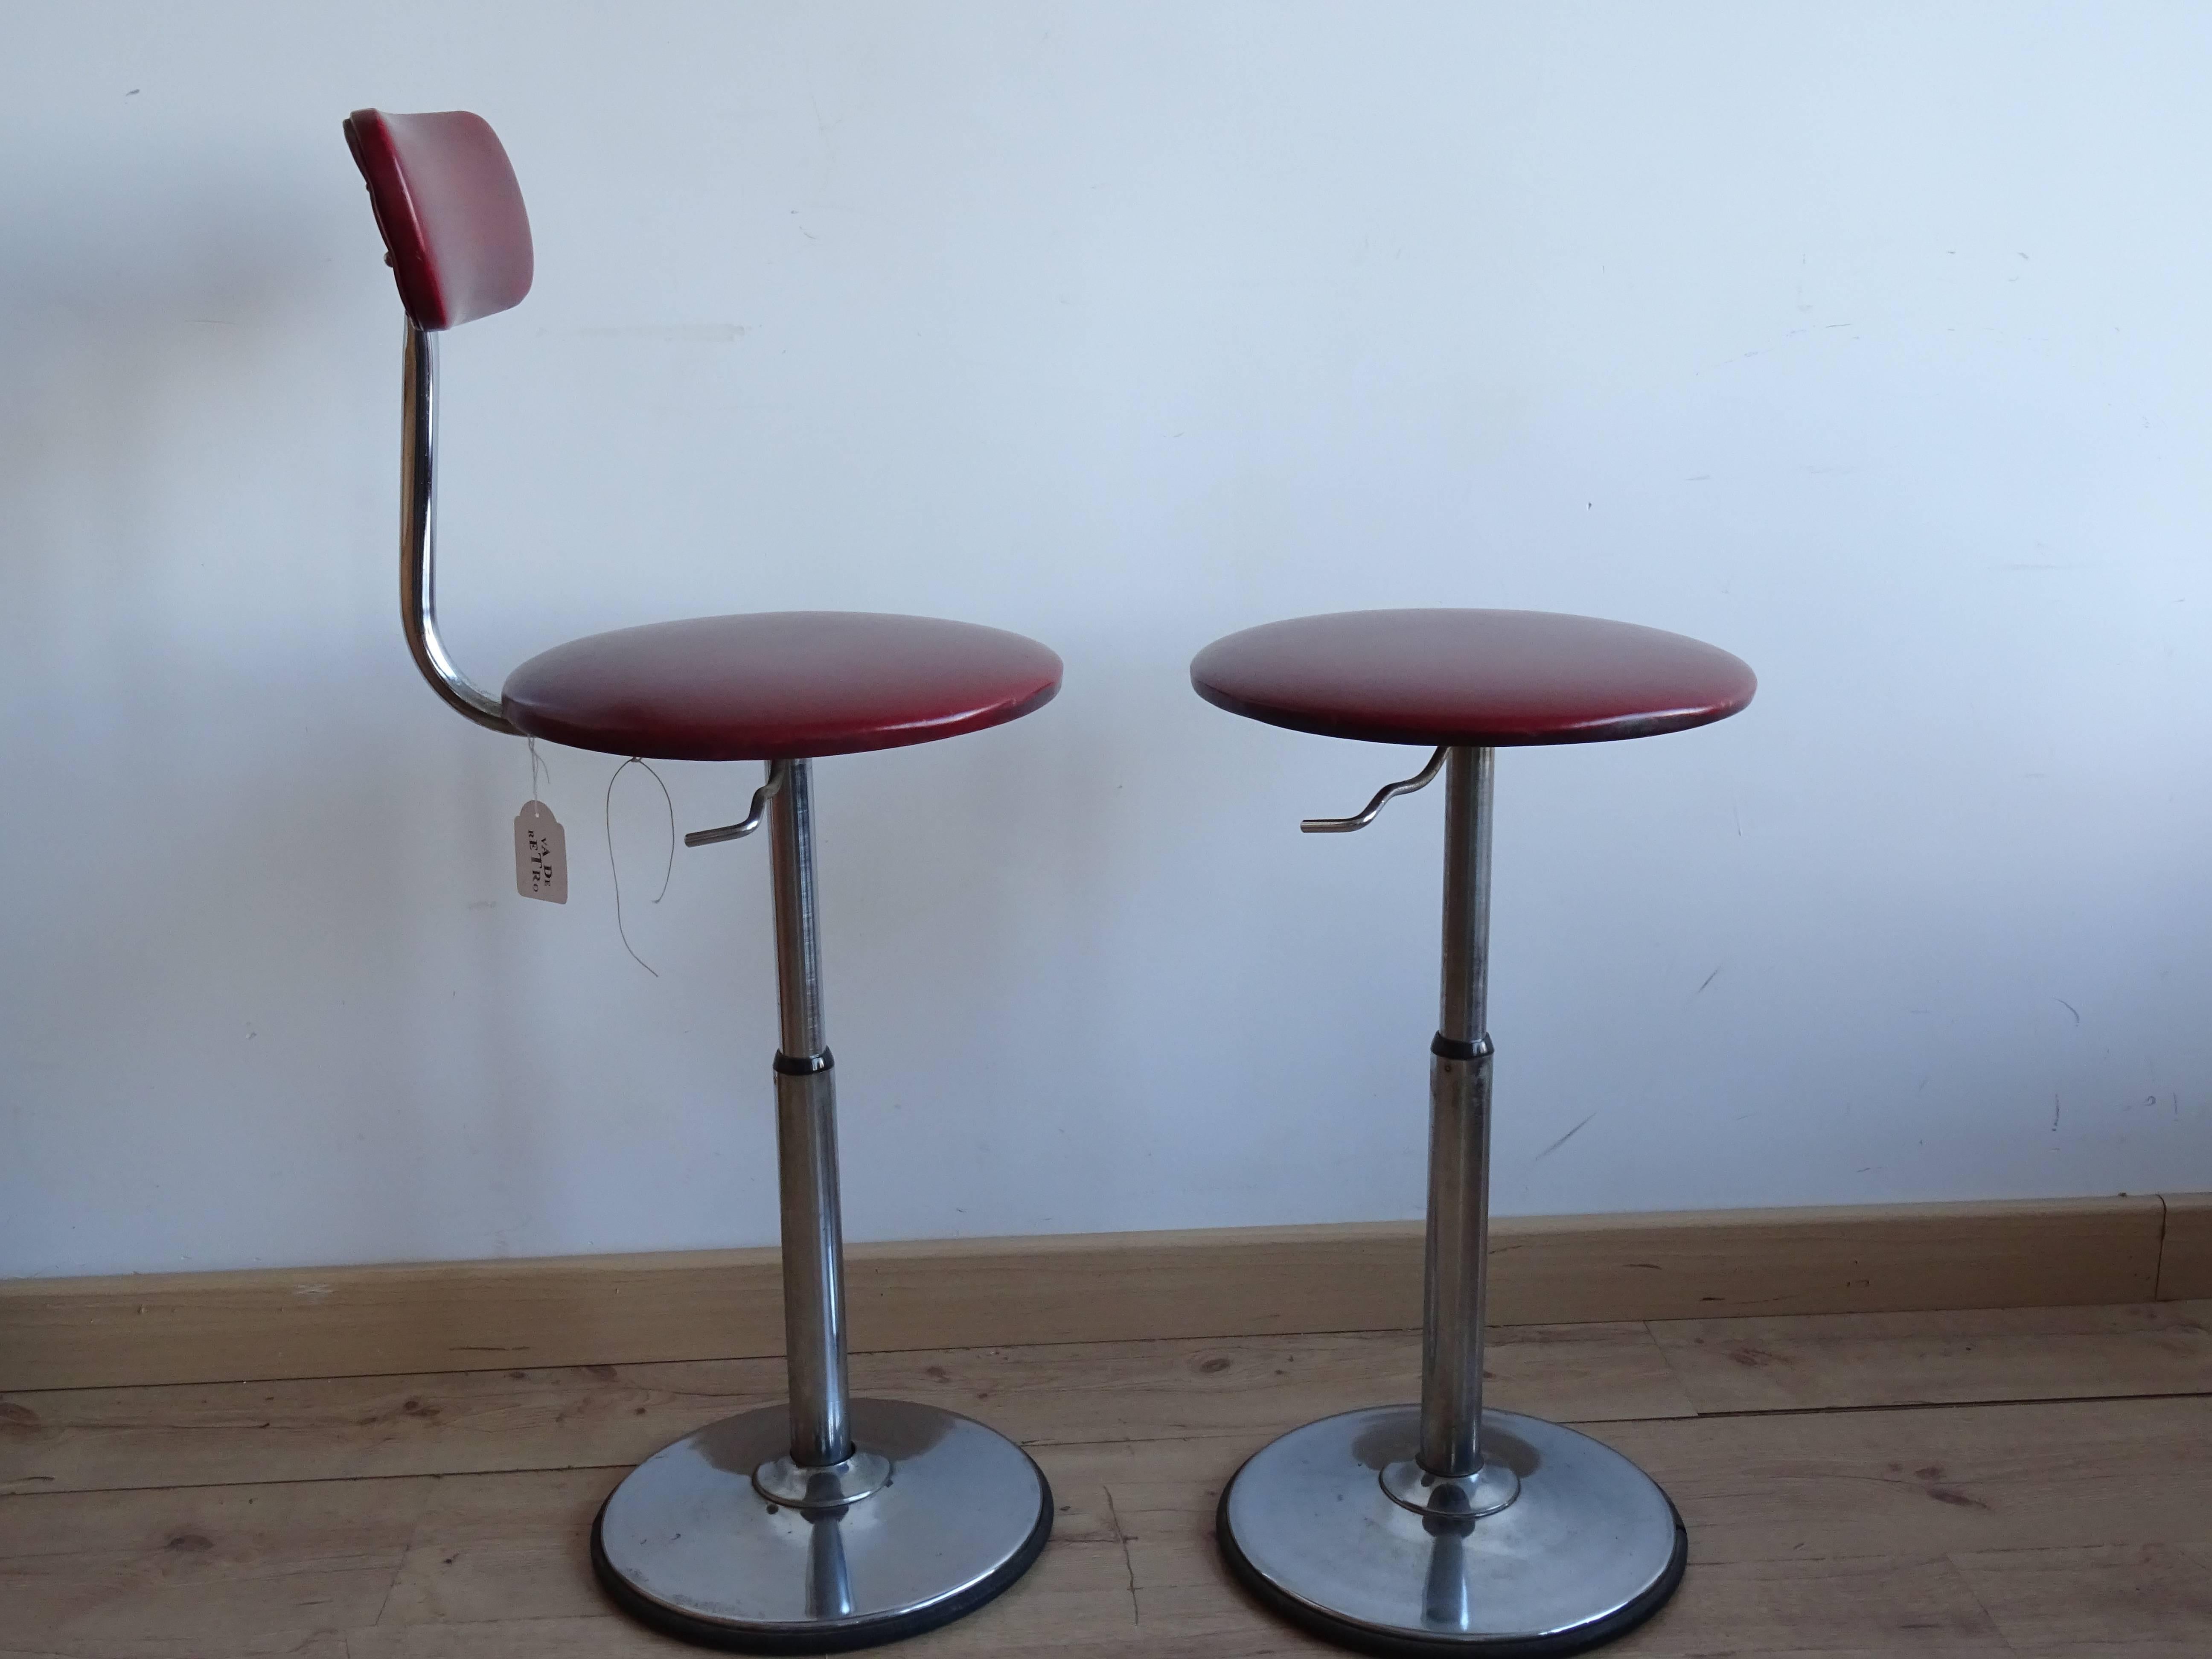 Two bar stools manufactured in France in the 1960s. The bases are made from chrome metal with skai red leather upholstery. Their heights are also adjustable from 39cm to 60cm. The set is in a very good vintage condition, with some rust marks around